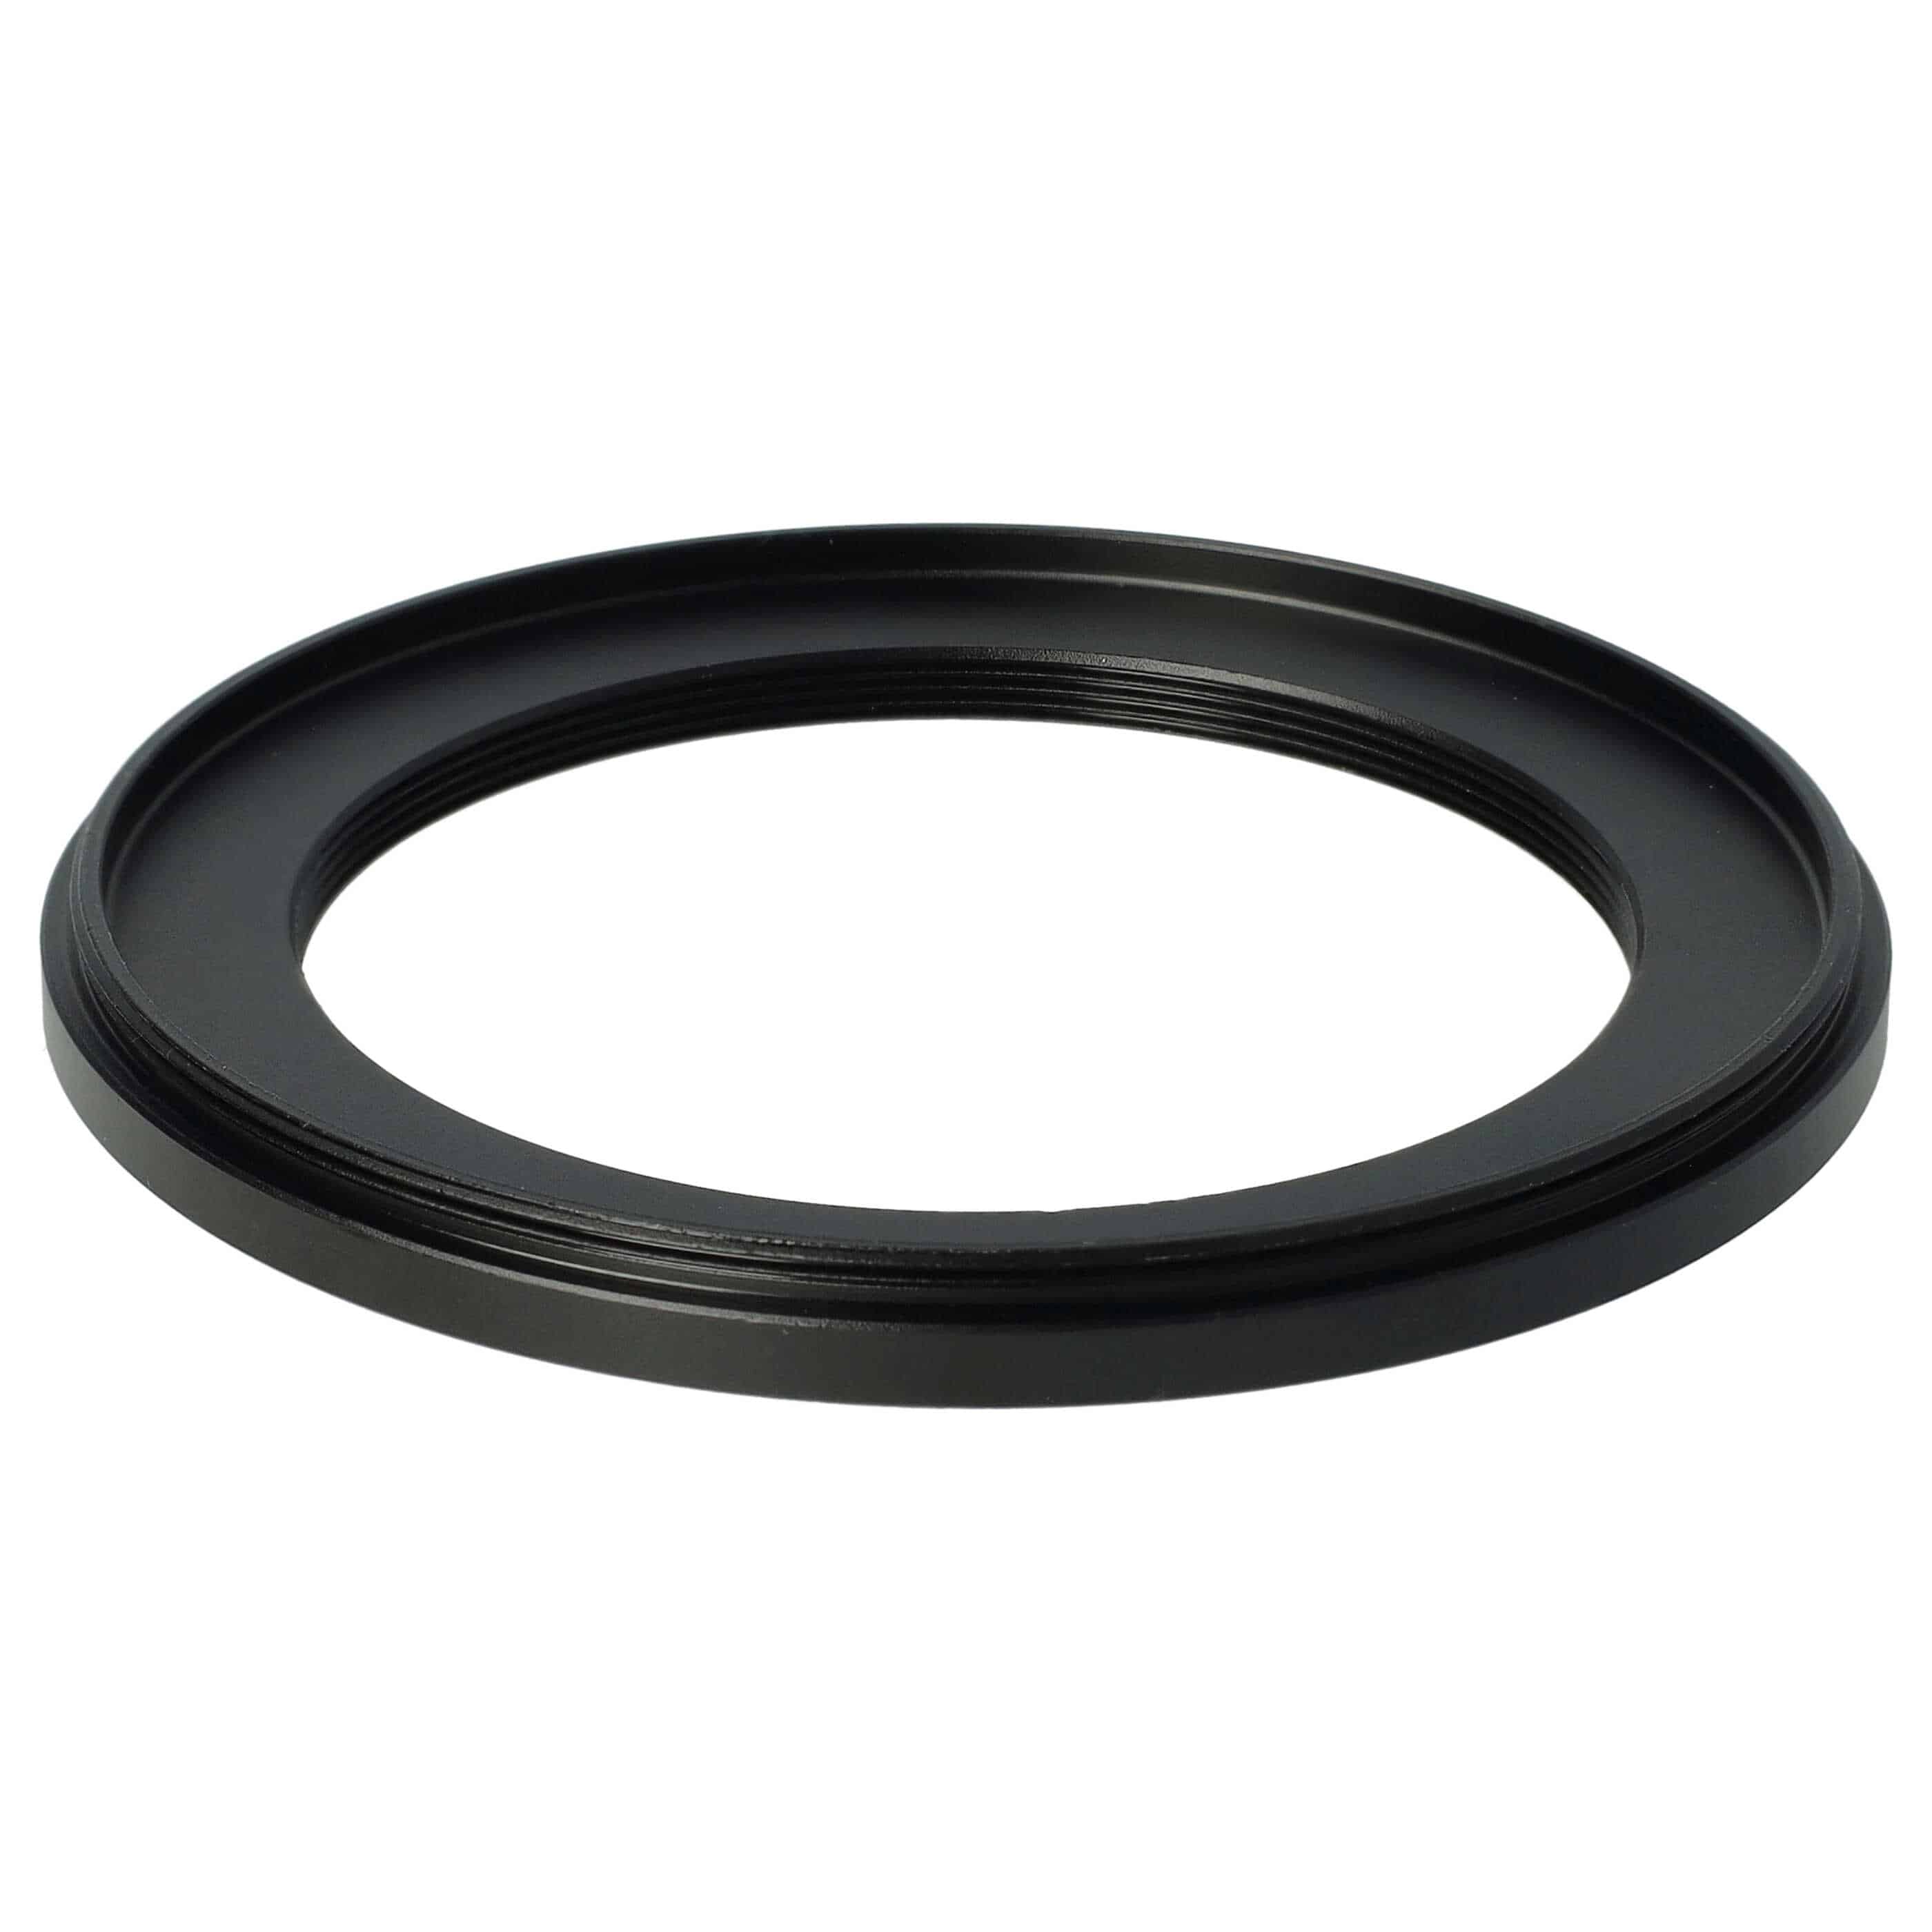 Step-Down Ring Adapter from 77 mm to 58 mm suitable for Camera Lens - Filter Adapter, metal